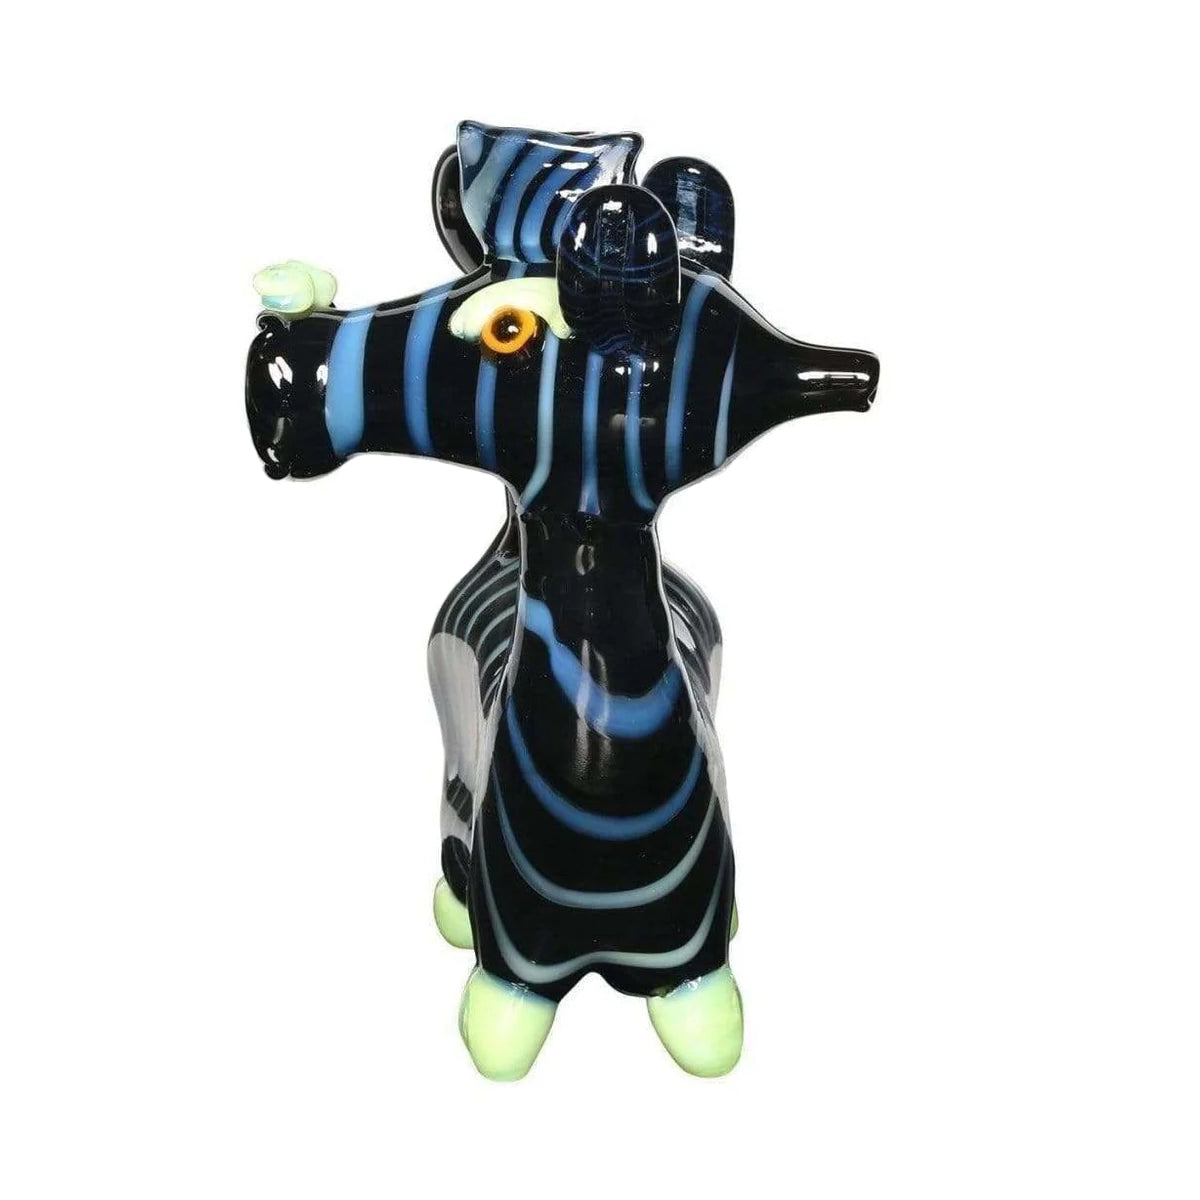 Novelty | Zebra Stripes with Slyme Water Pipe | 6" - 14mm - Black